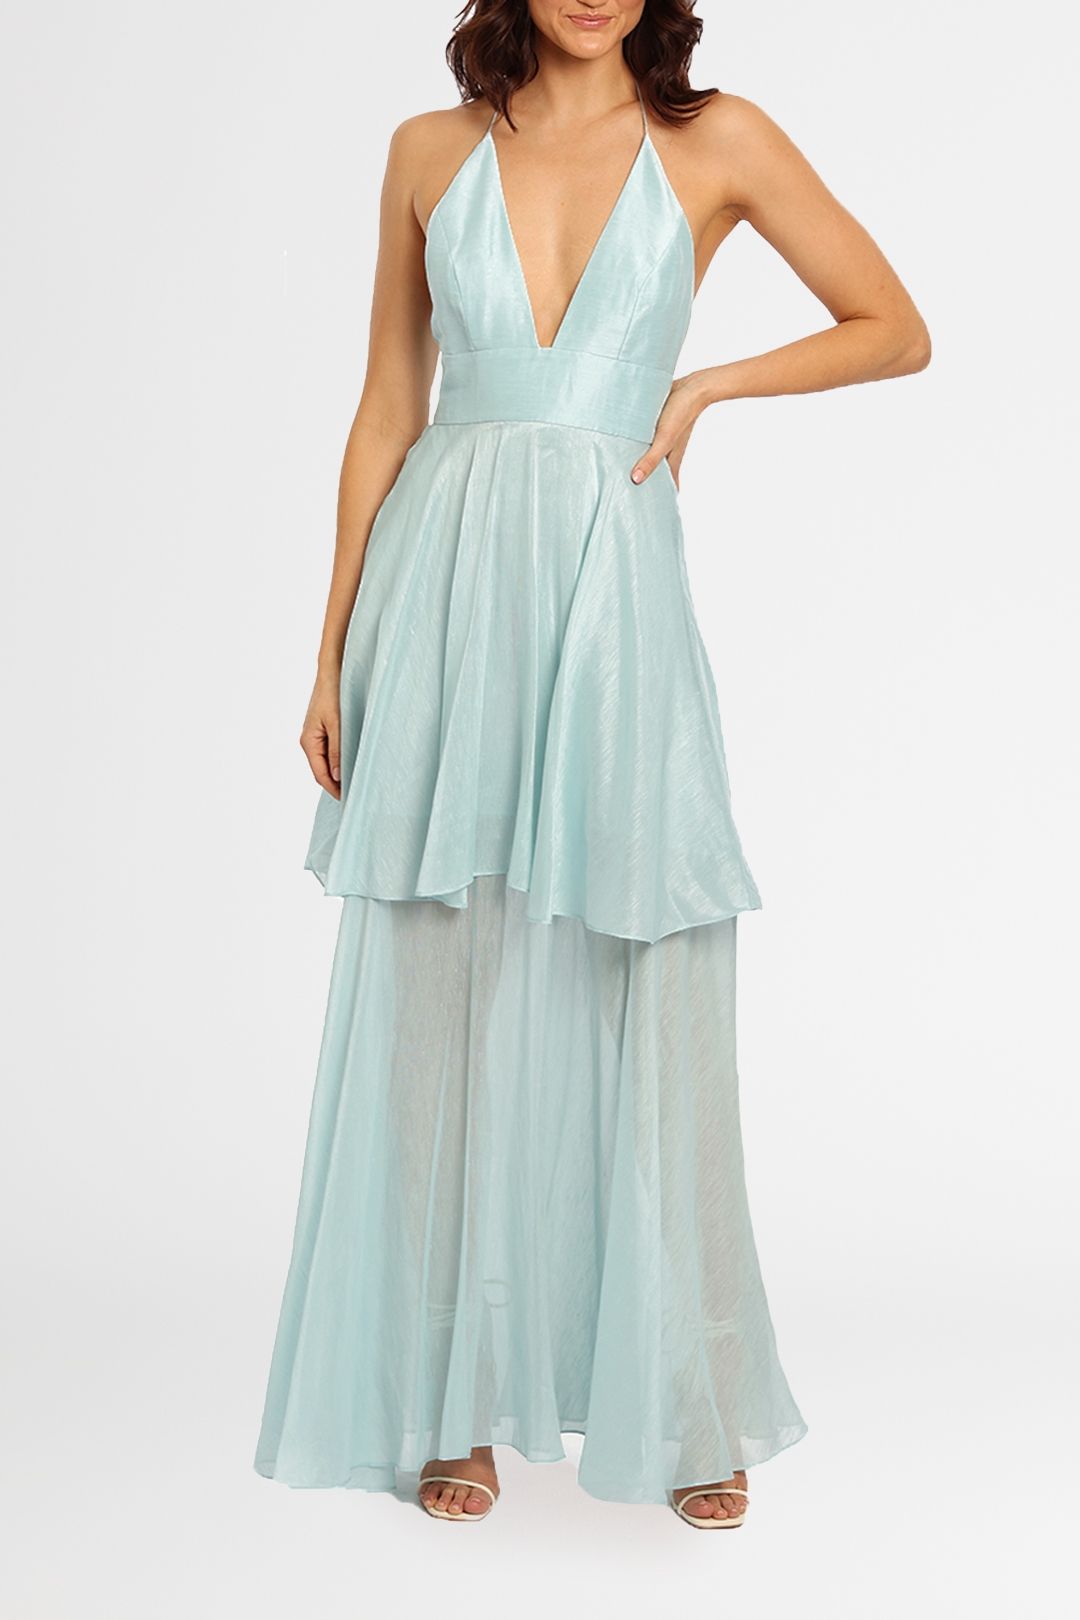 Eminence Gown in Pine by Ginger & Smart for Rent | GlamCorner